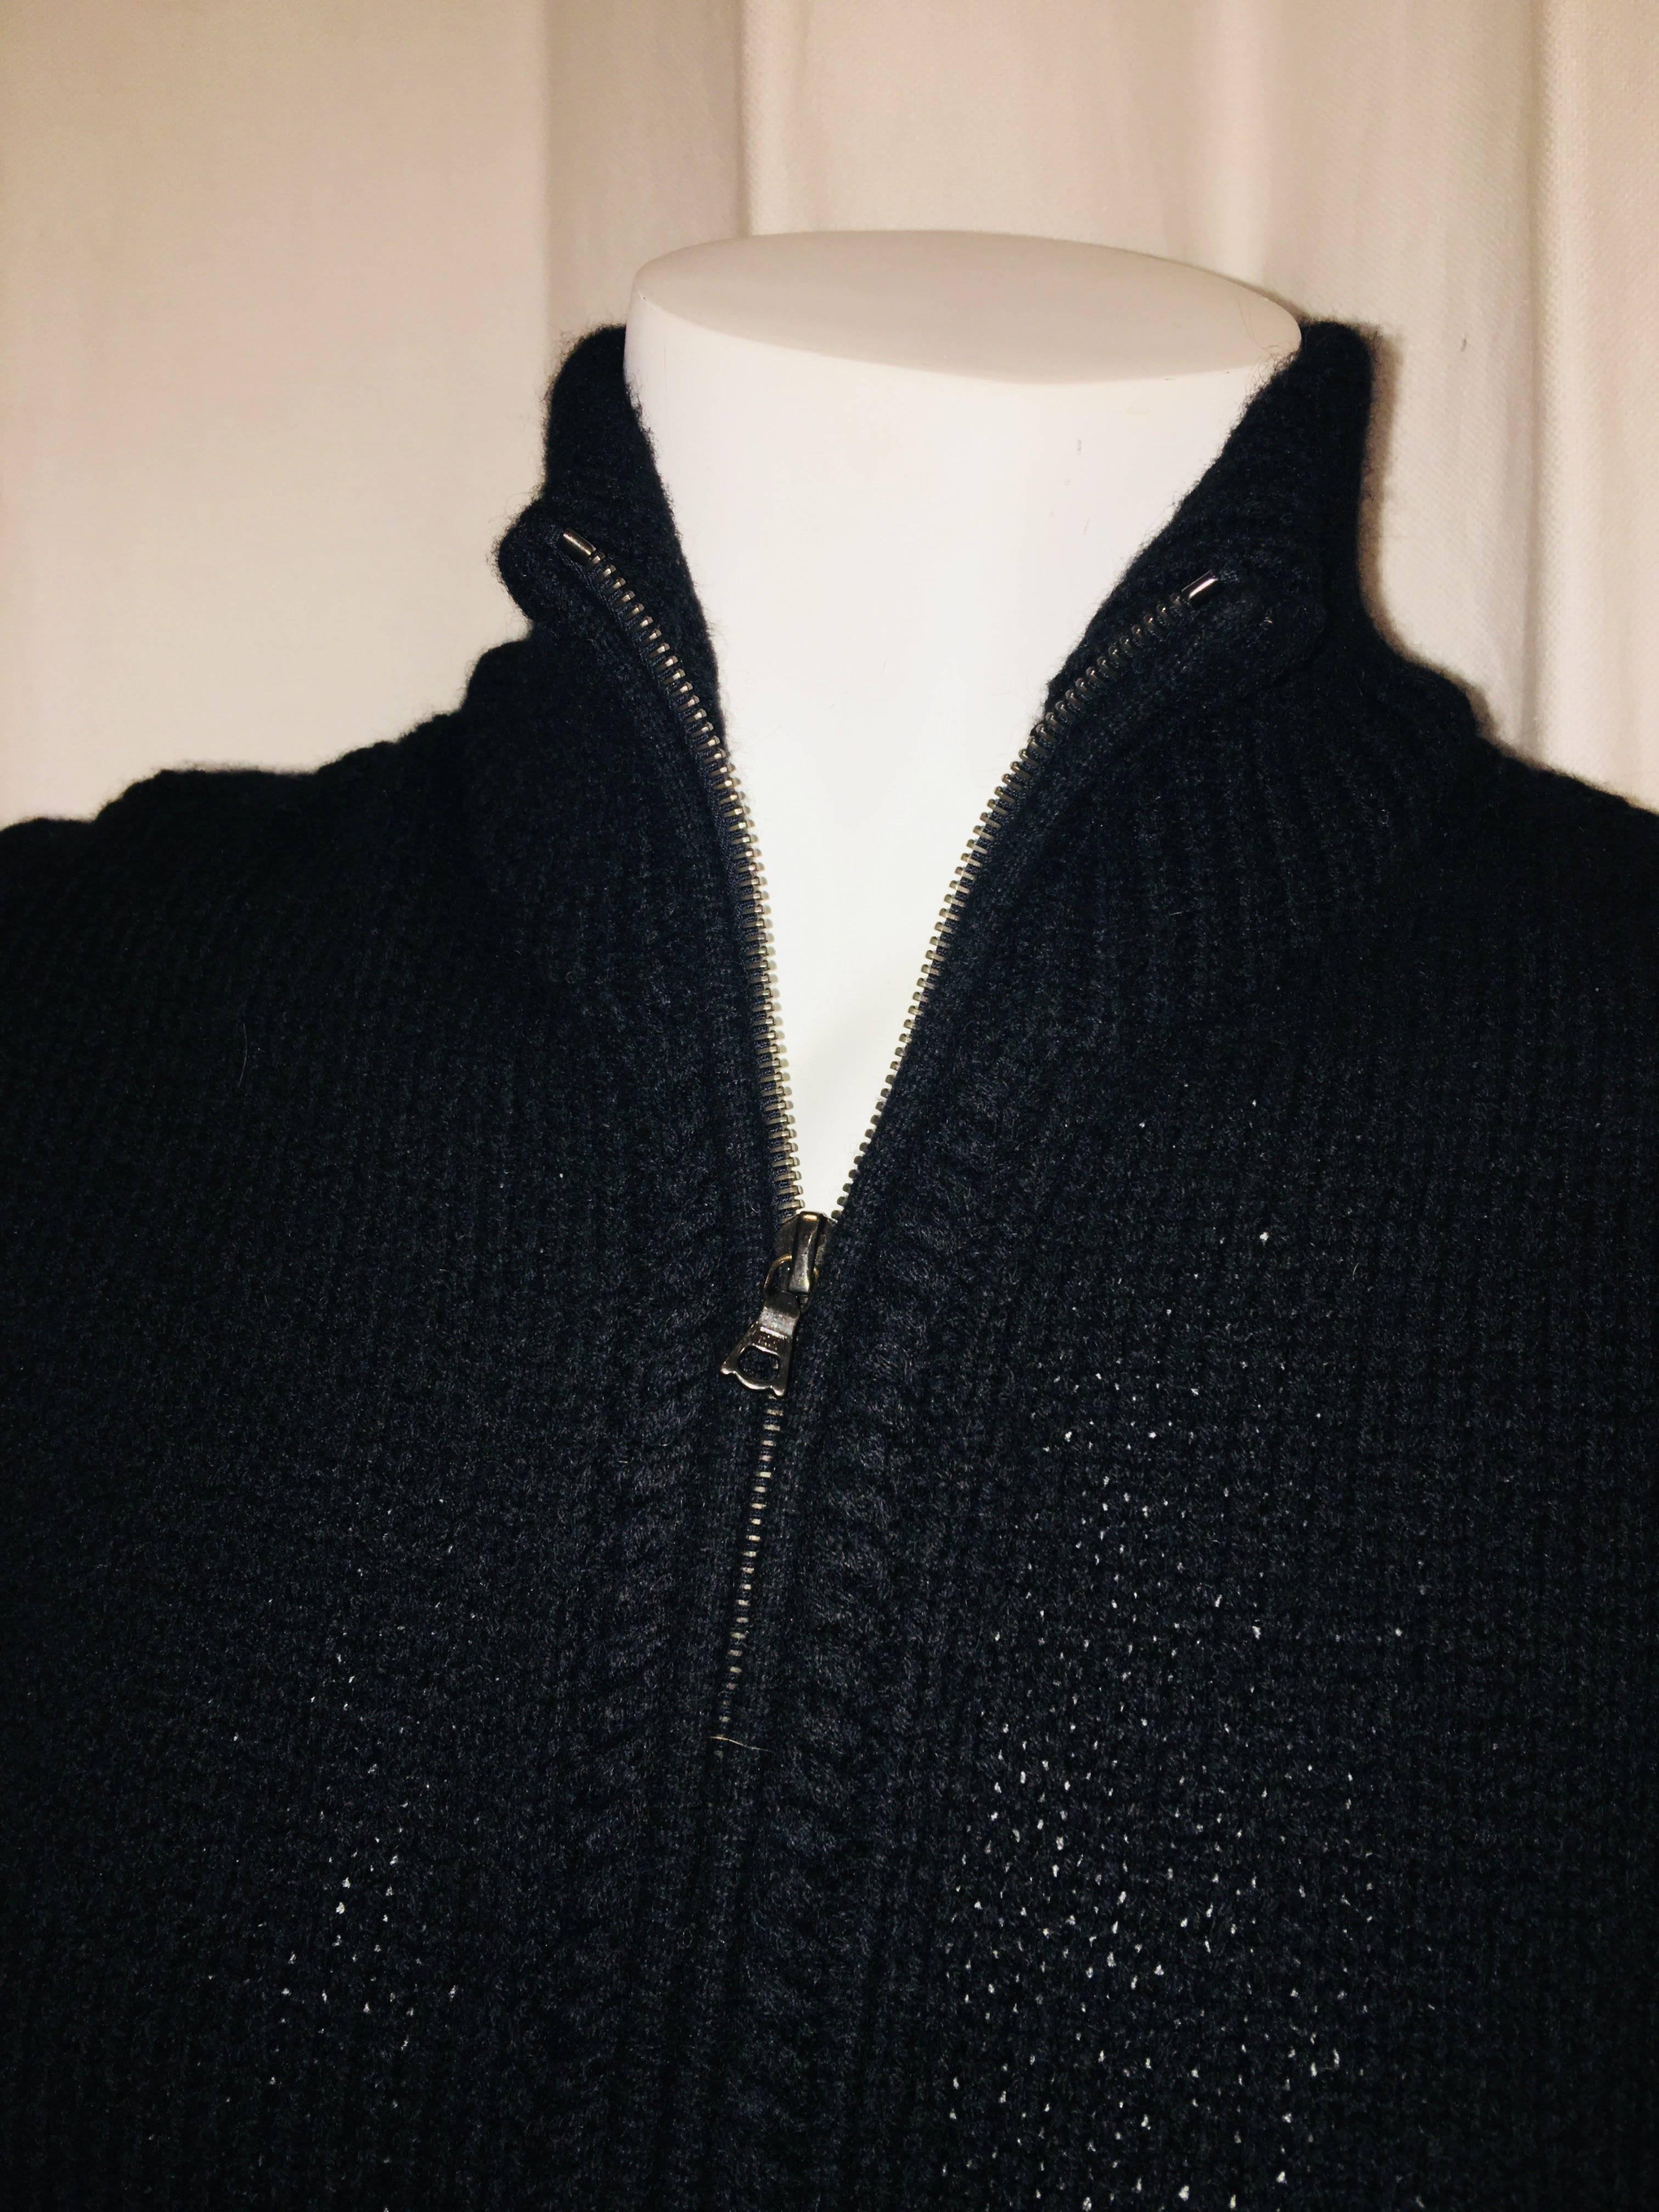 TSE Handknit Cashmere Vest with Zip Front and High Collar. 